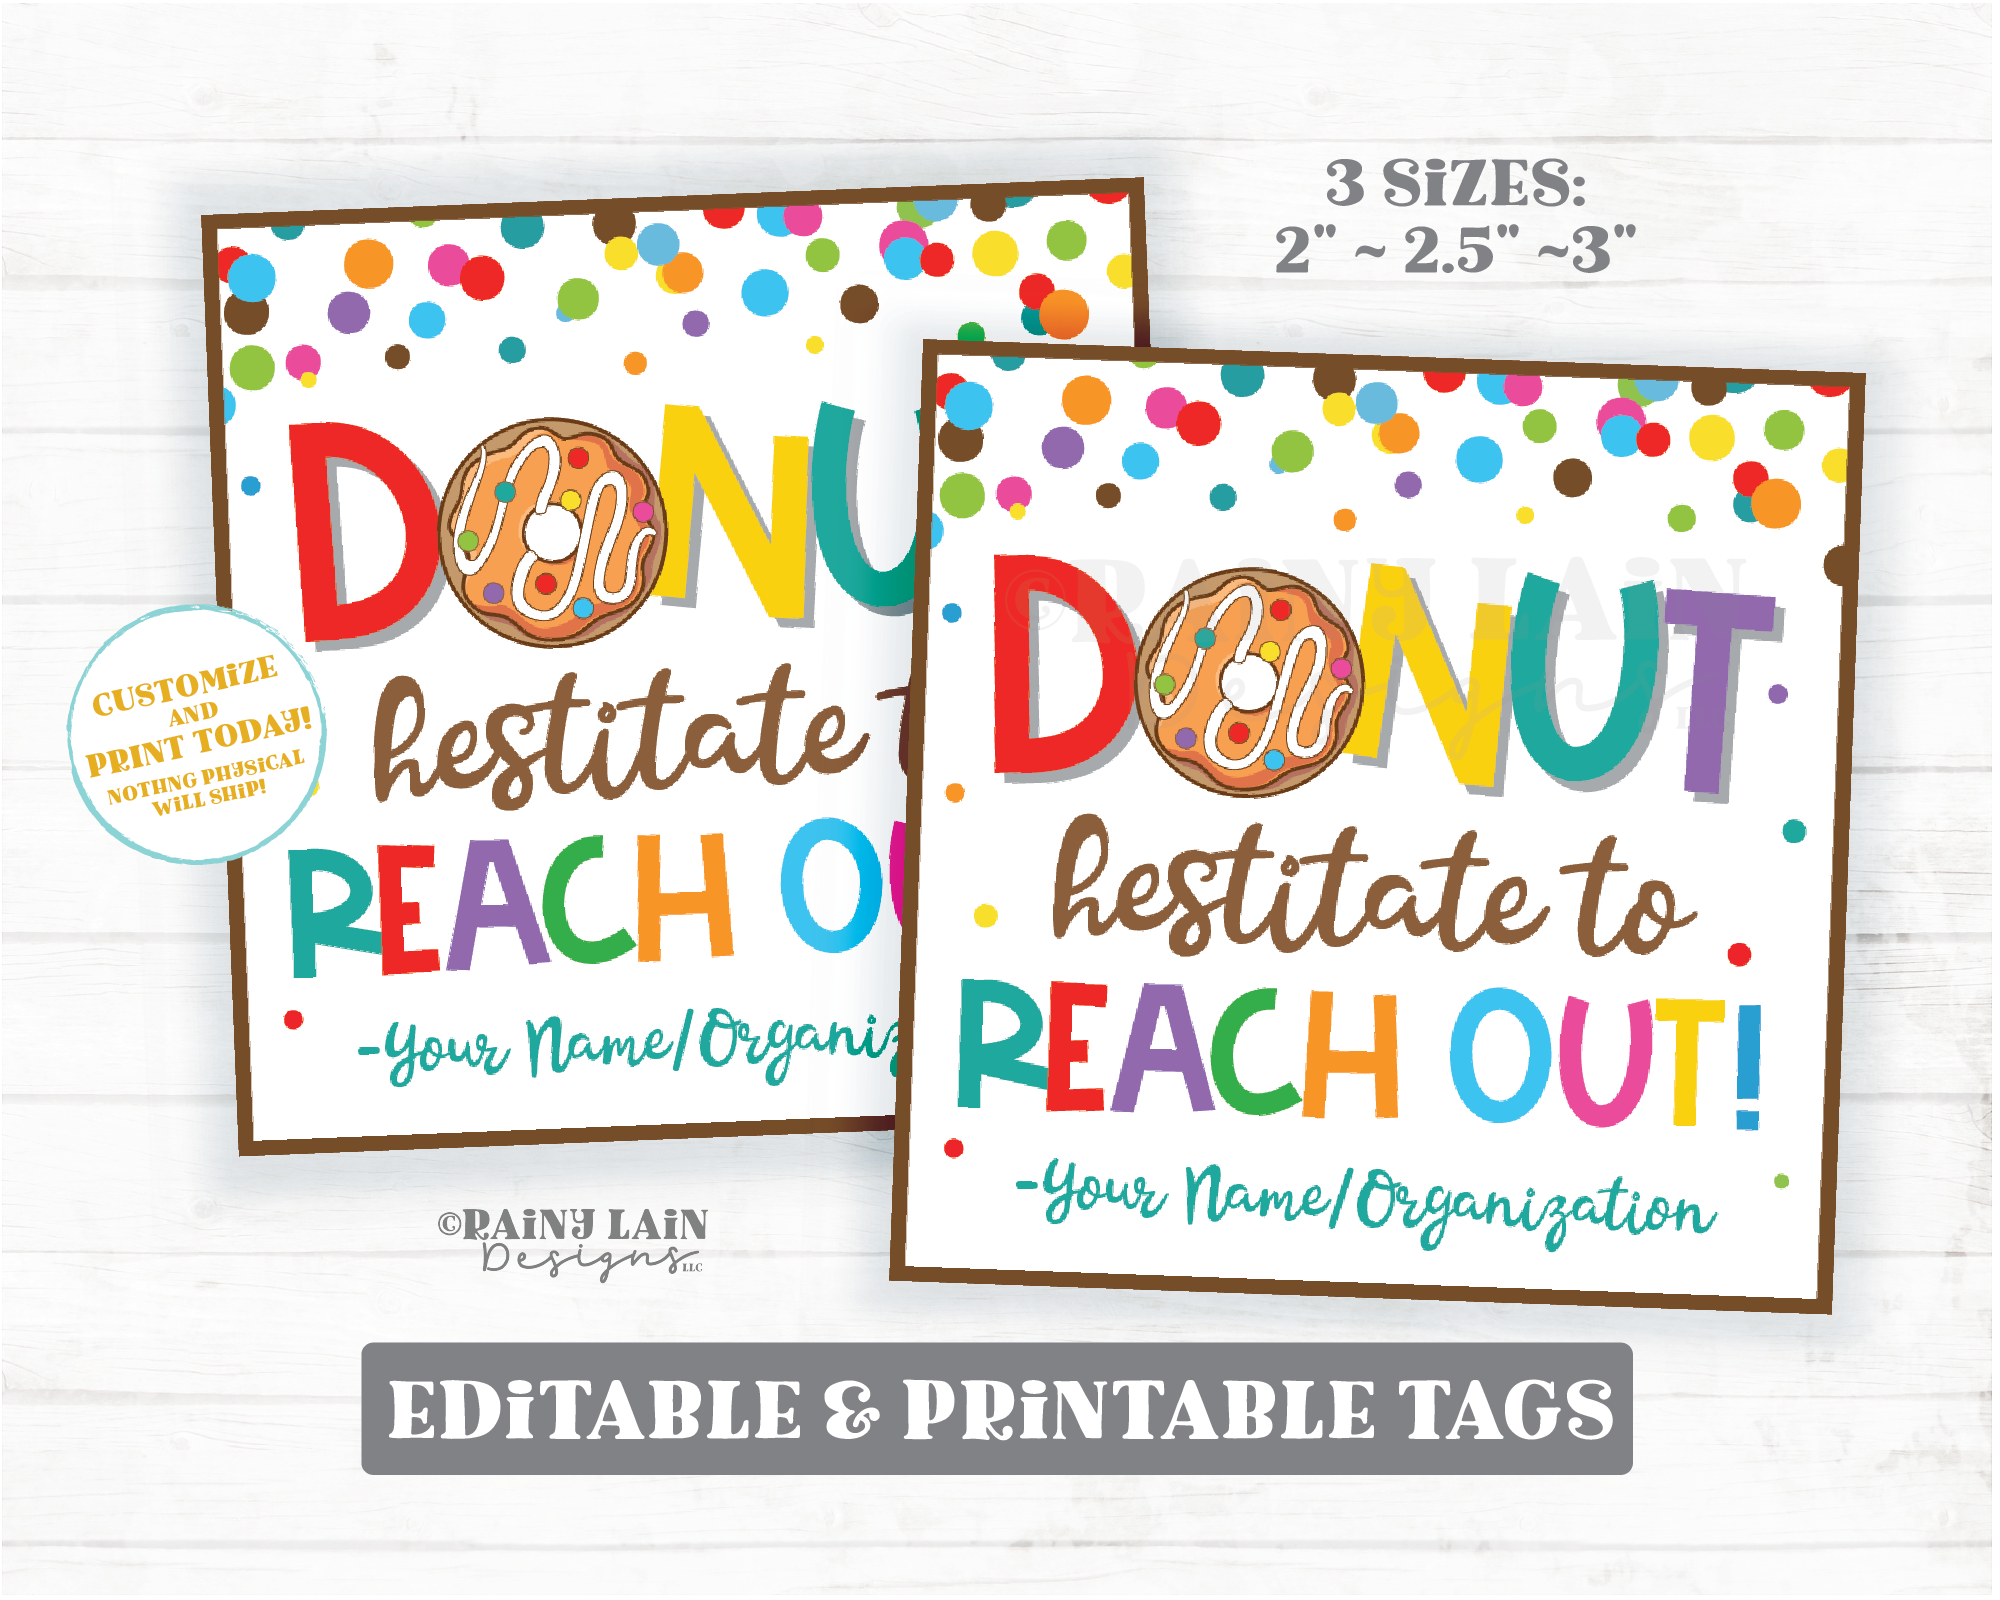 Donut Hesitate to Reach Out Tag Donut Holes Realtor Gift Staff Teacher Support School PTA PTO Contact Information Company Business Customer